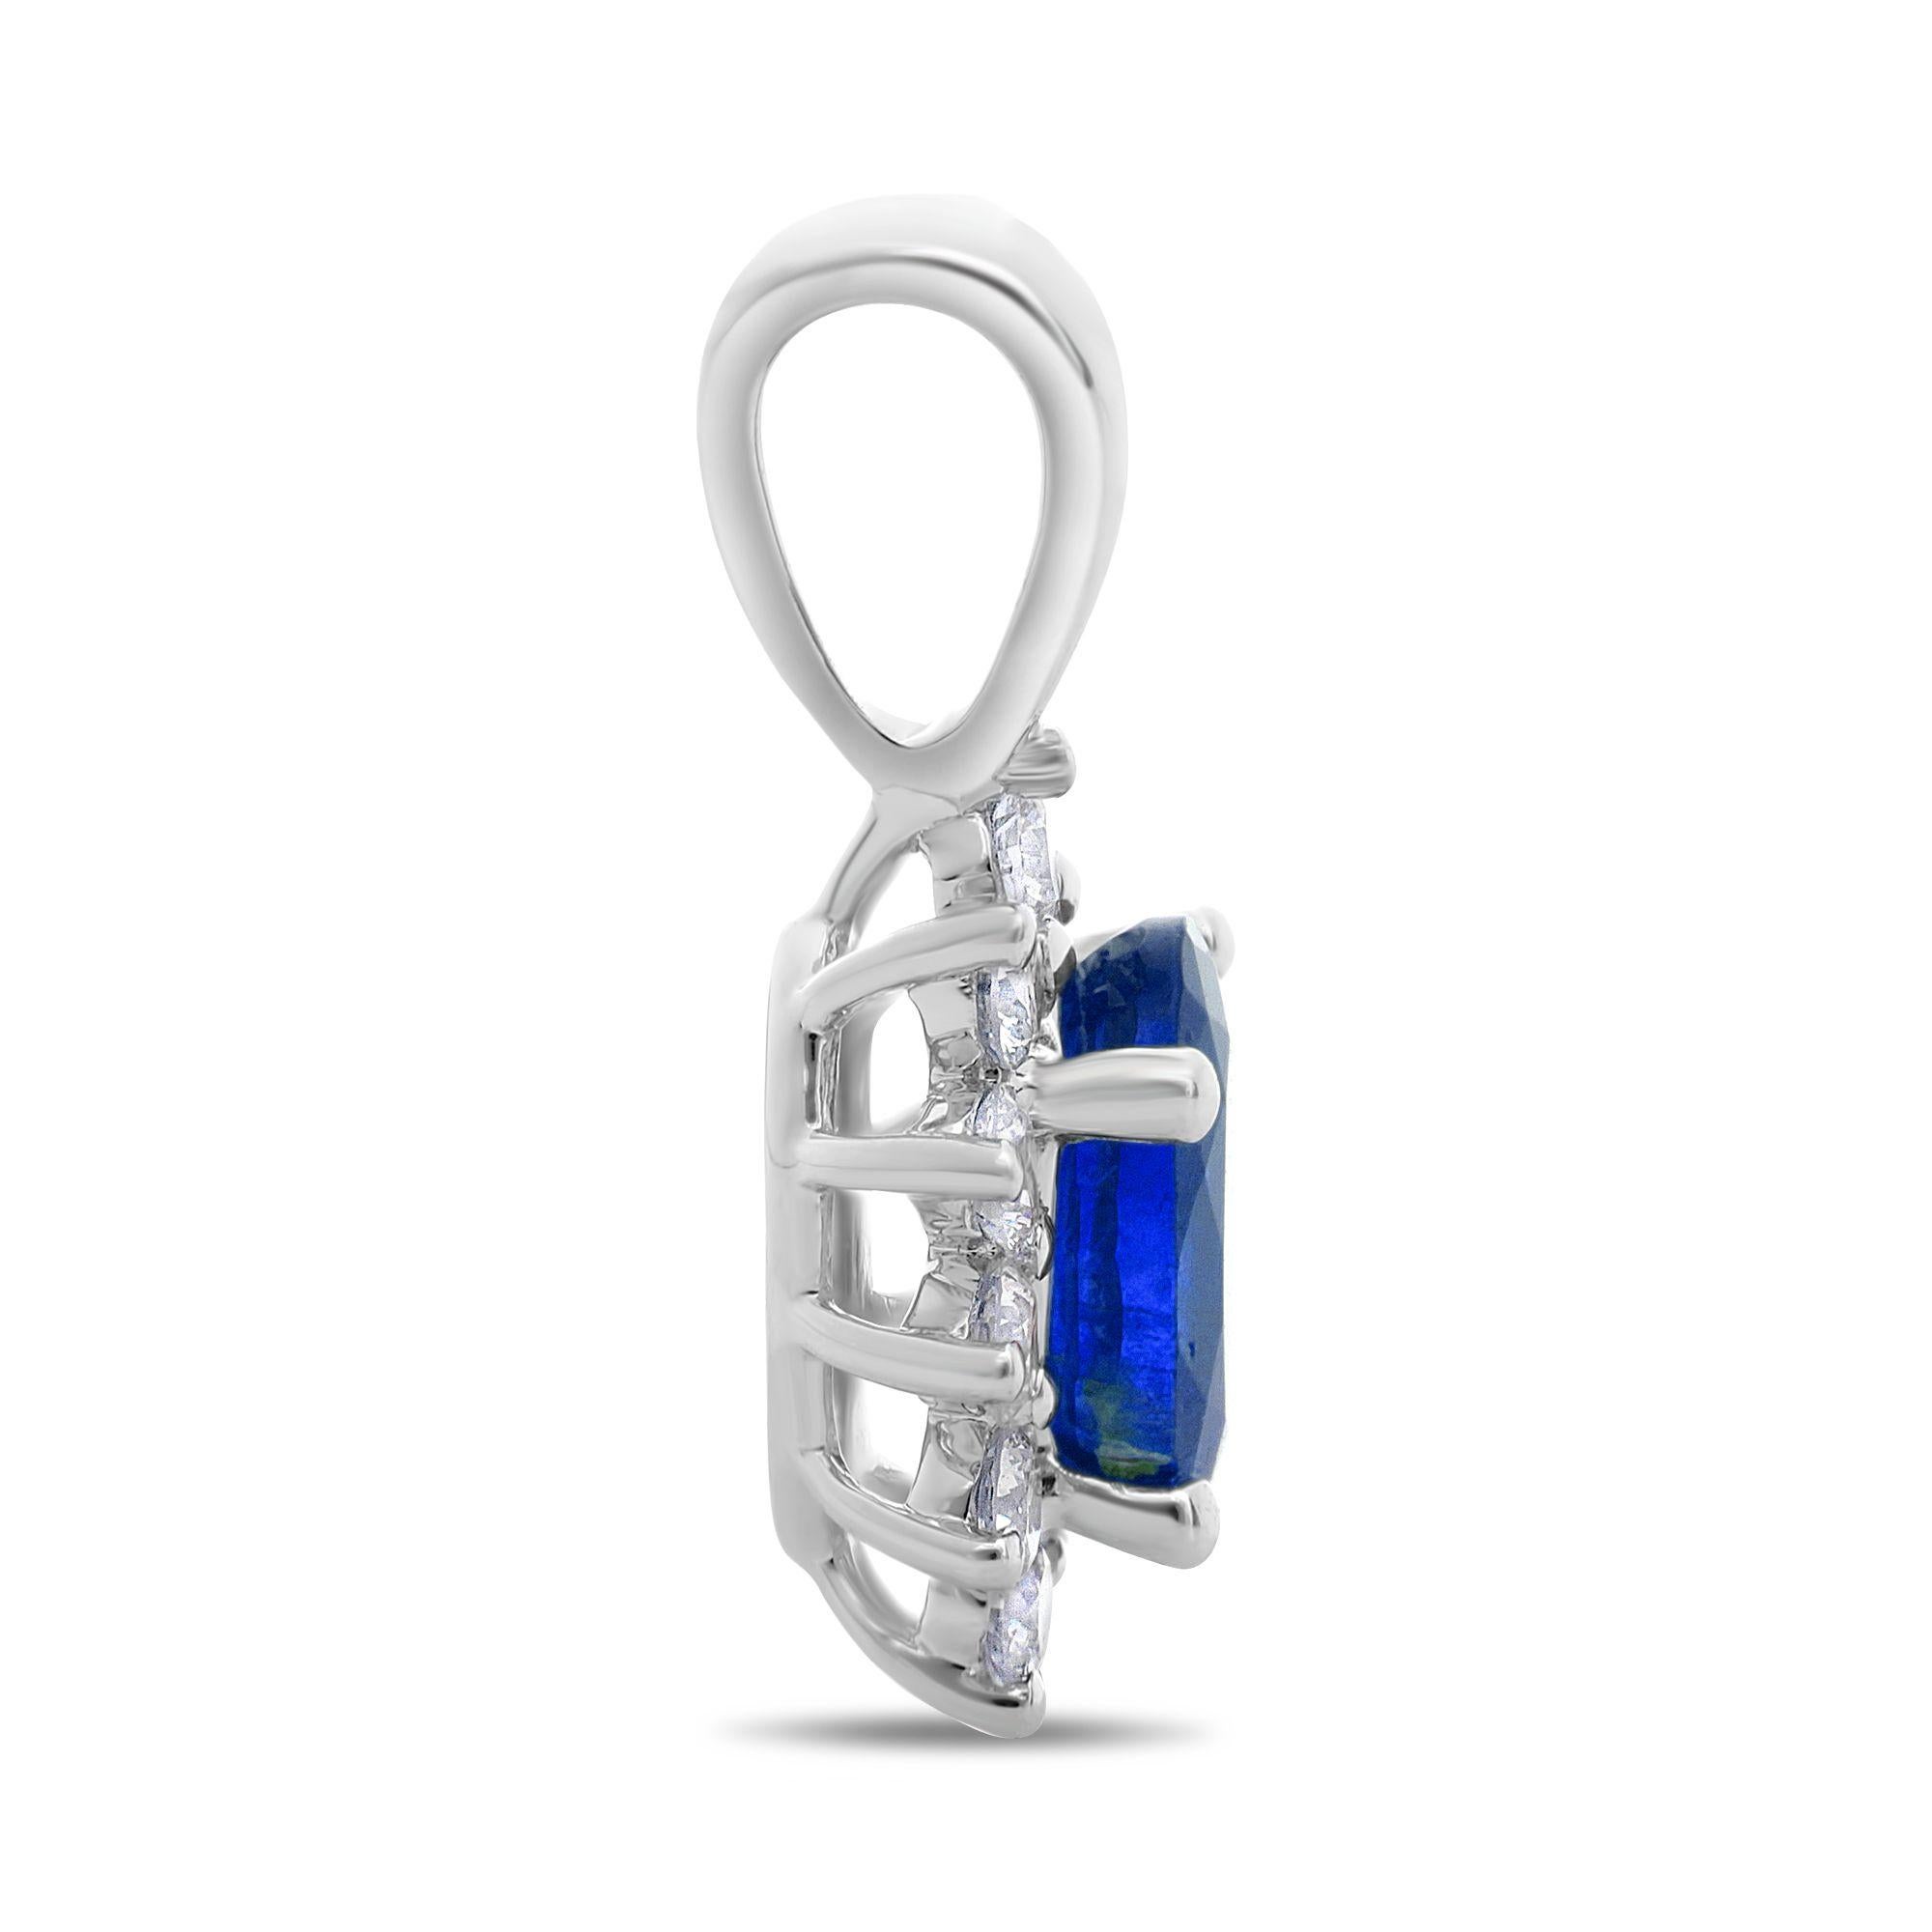 At the center of this stunning 18K white gold pendant rests a 0.62 carat, oval cut blue sapphire. Round cut white diamonds, totaling to 0.20 carats, surround the colorful center stone to add sparkle and a beautiful contrast.

The center stone is eye